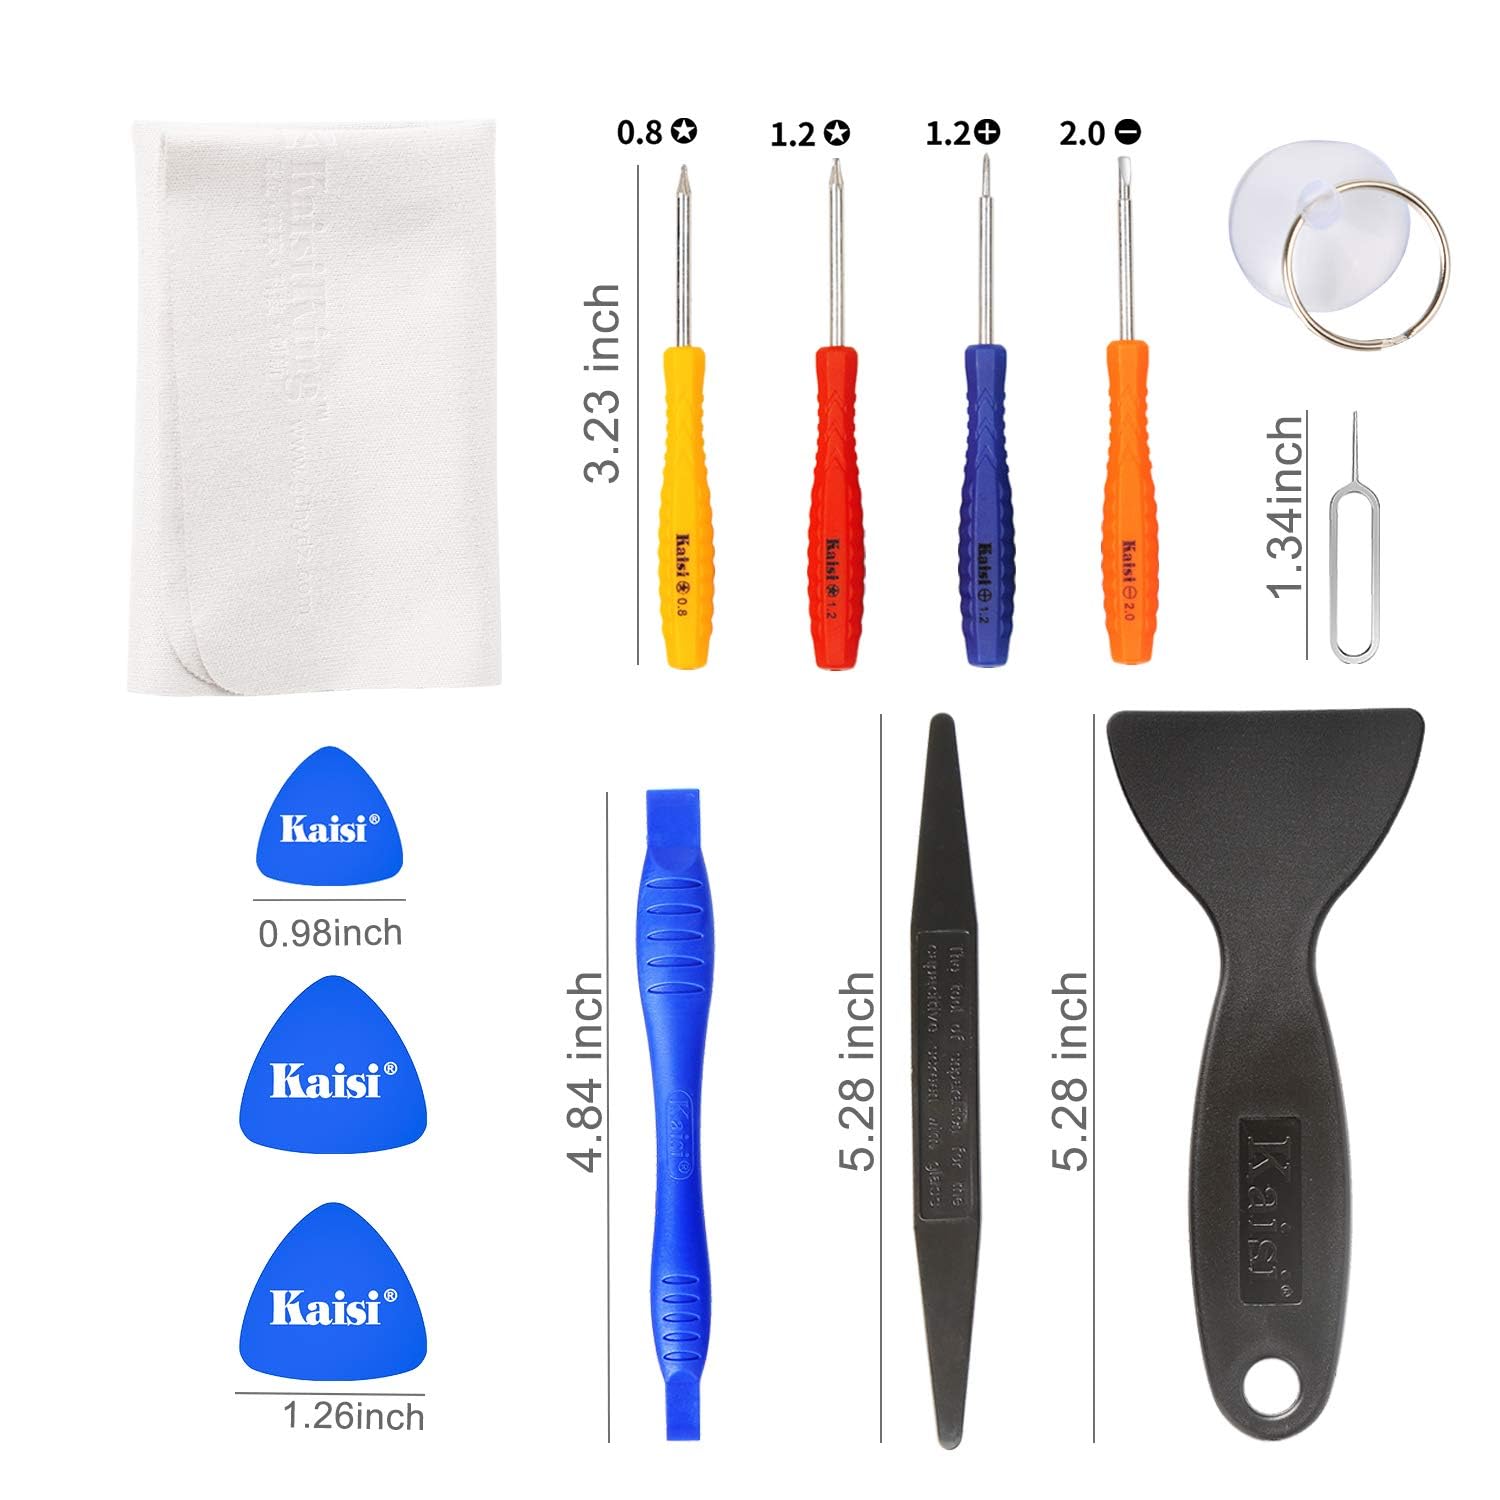 Kaisi Professional Electronics Opening Pry Tool Repair Kit +S-130 Insulation Silicone Soldering Mat Repair Mat Nylon Spudgers and Anti-Static Tweezers for Cellphone iPhone Laptops Tablets and More